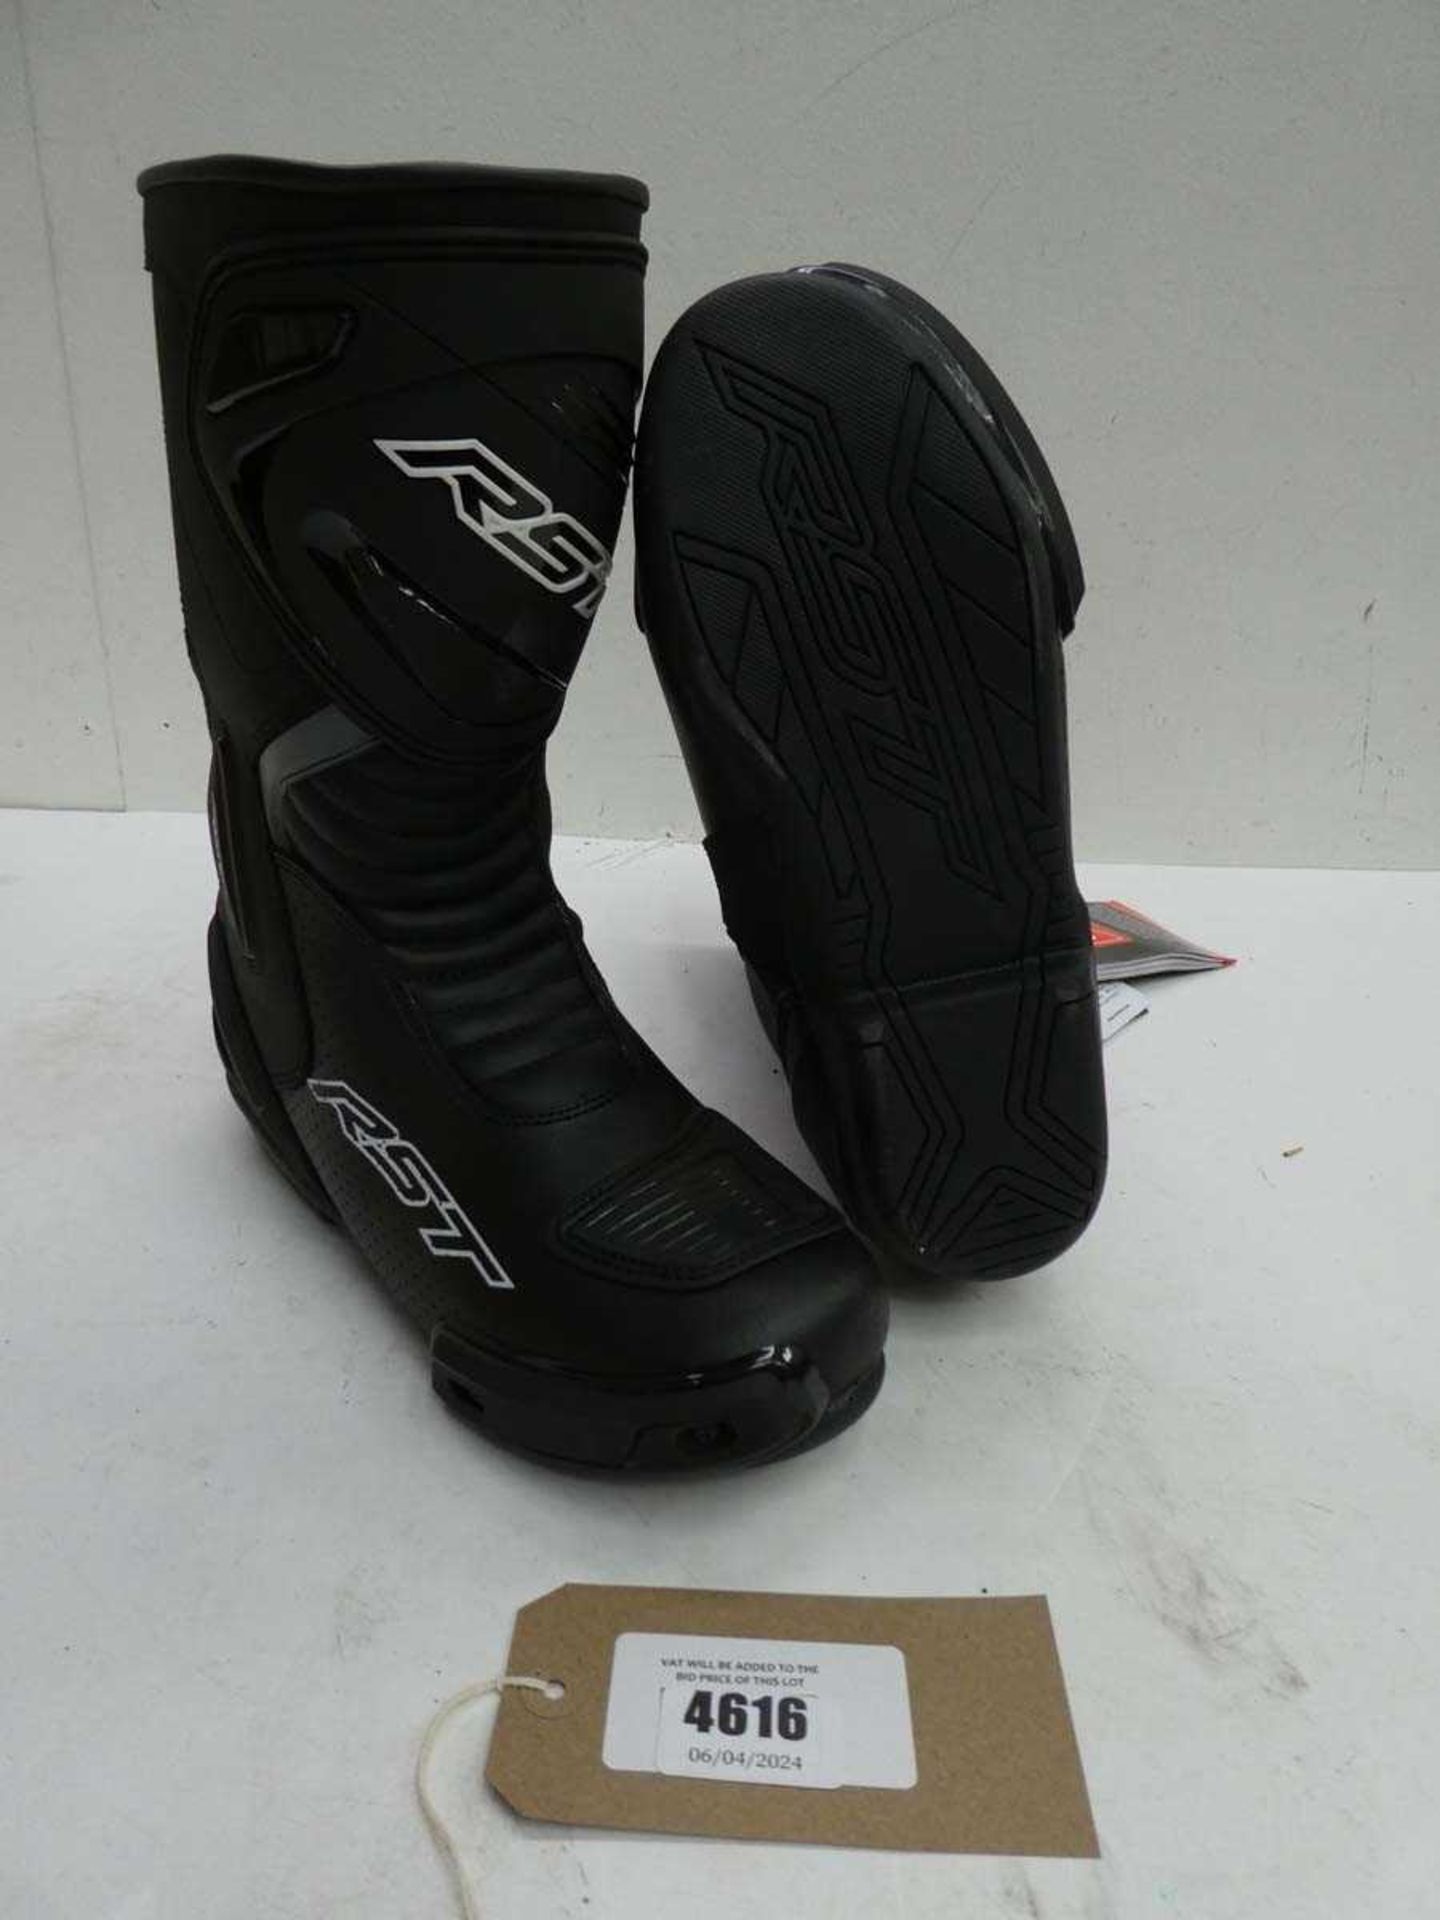 +VAT Pair of RST motorcycle boots Size 8